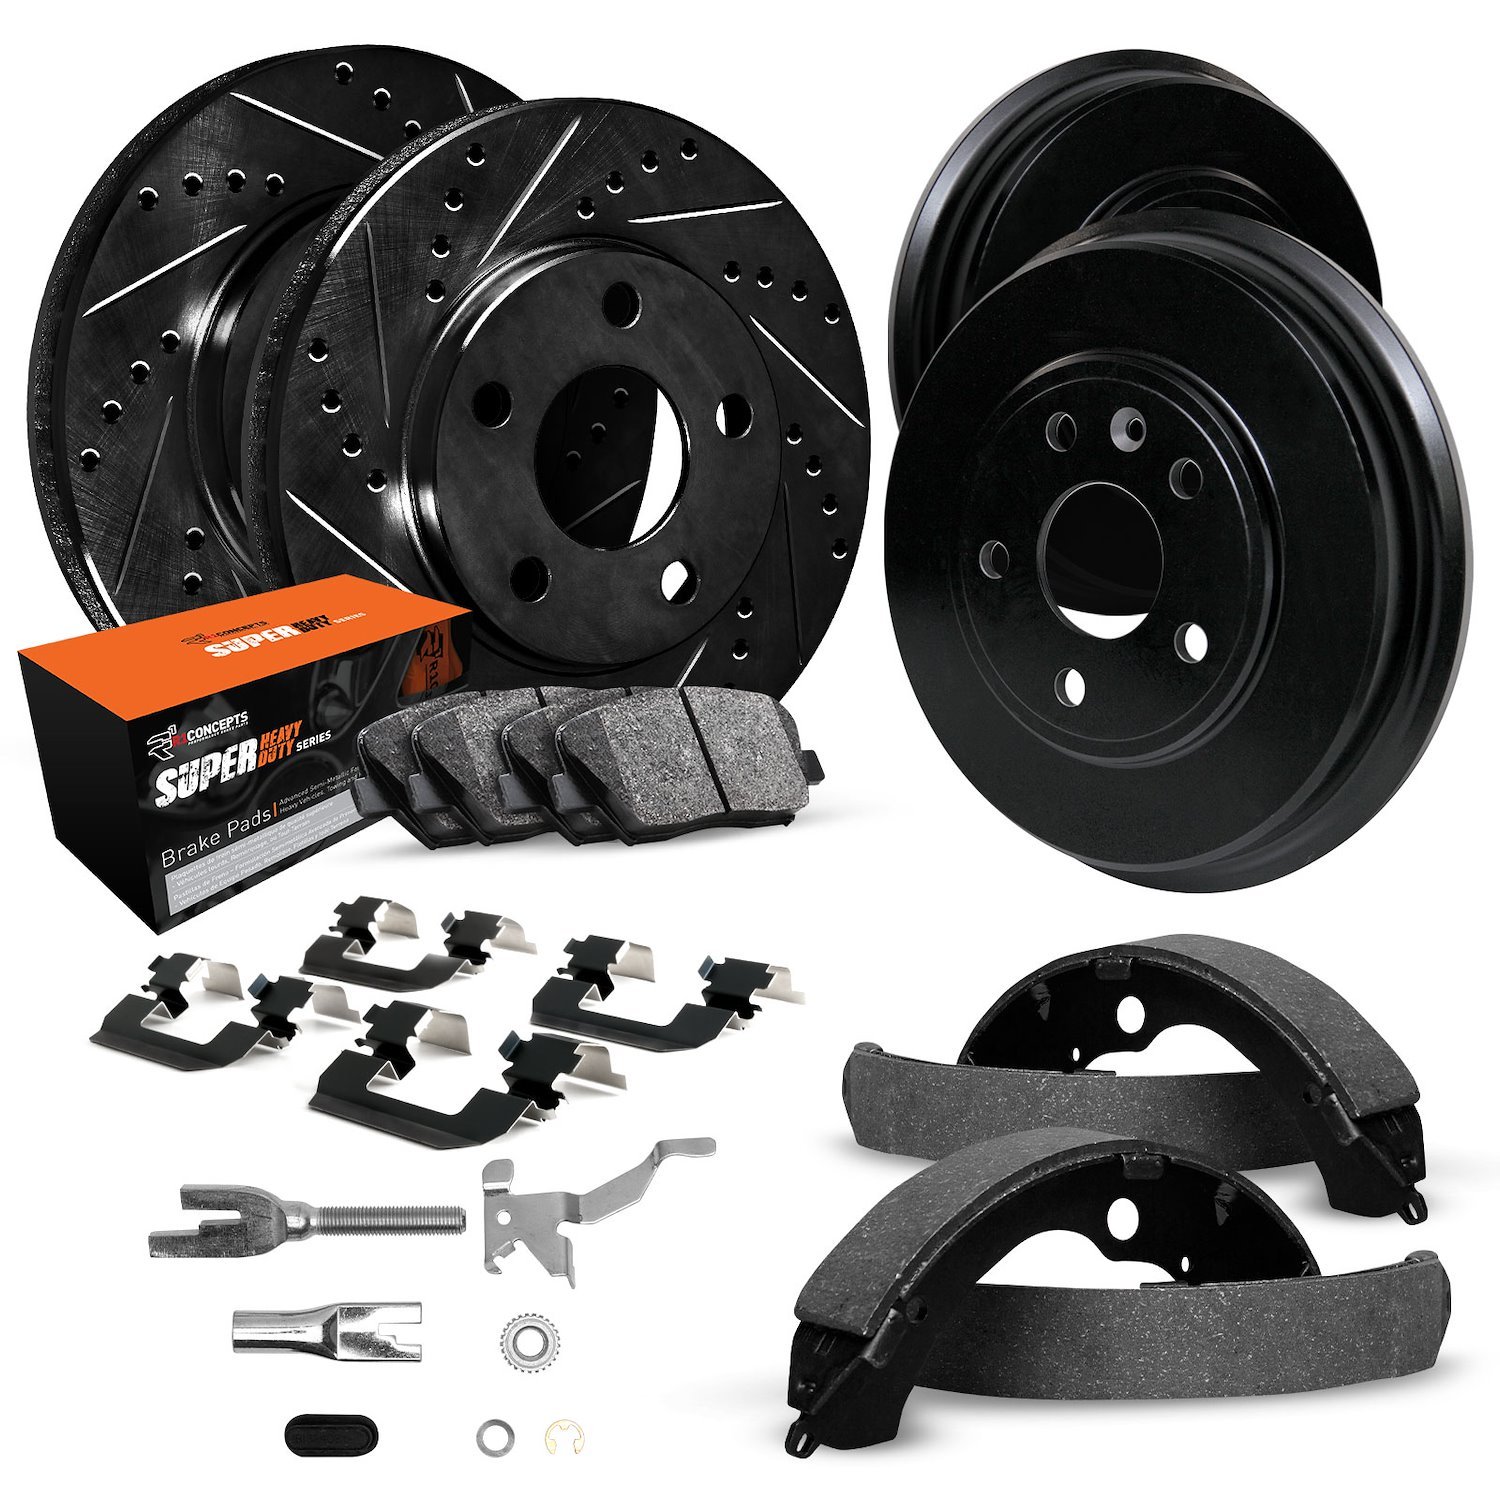 E-Line Slotted Black Brake Rotor & Drum Set w/Super-Duty Pads, Shoes, Hardware/Adjusters, 1986-1990 Ford/Lincoln/Mercury/Mazda